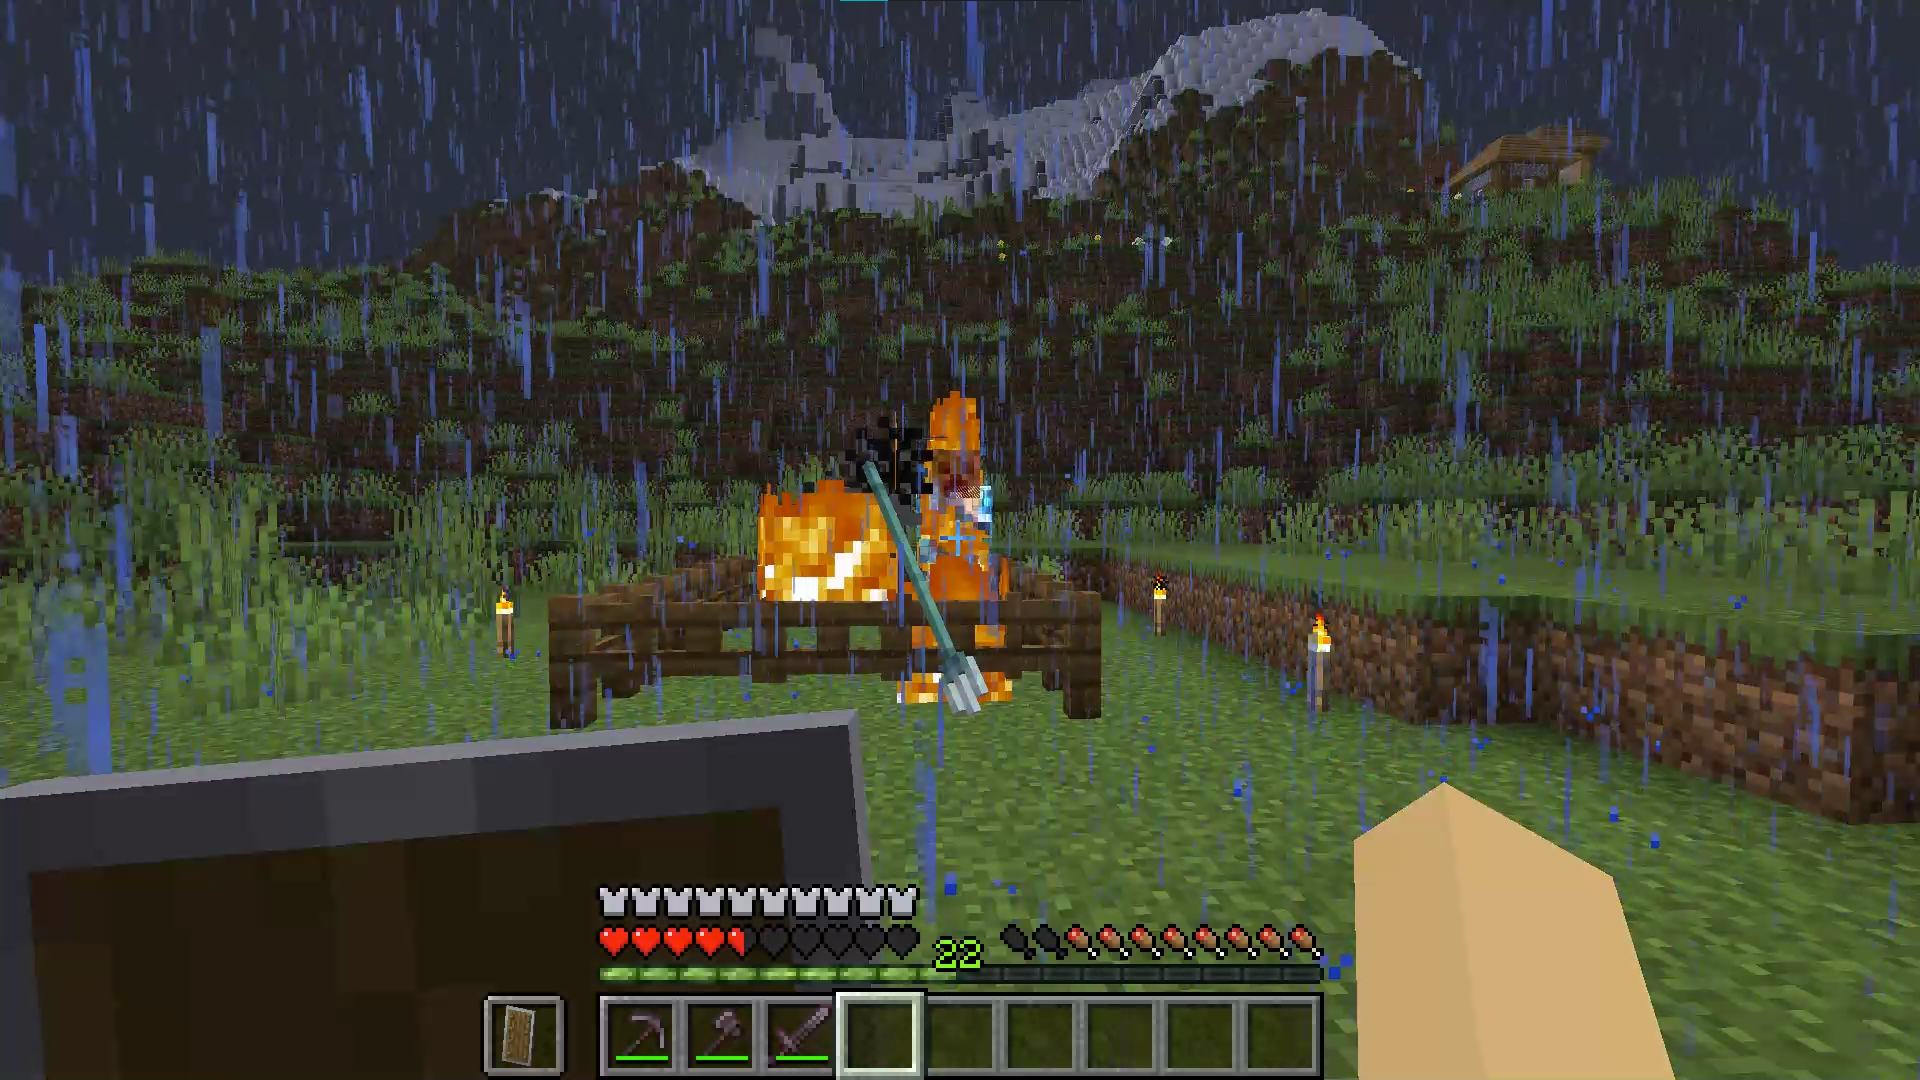 Image of a Charged Creeper on fire after being struck by lightning, enclosed within wooden fences in the game Minecraft